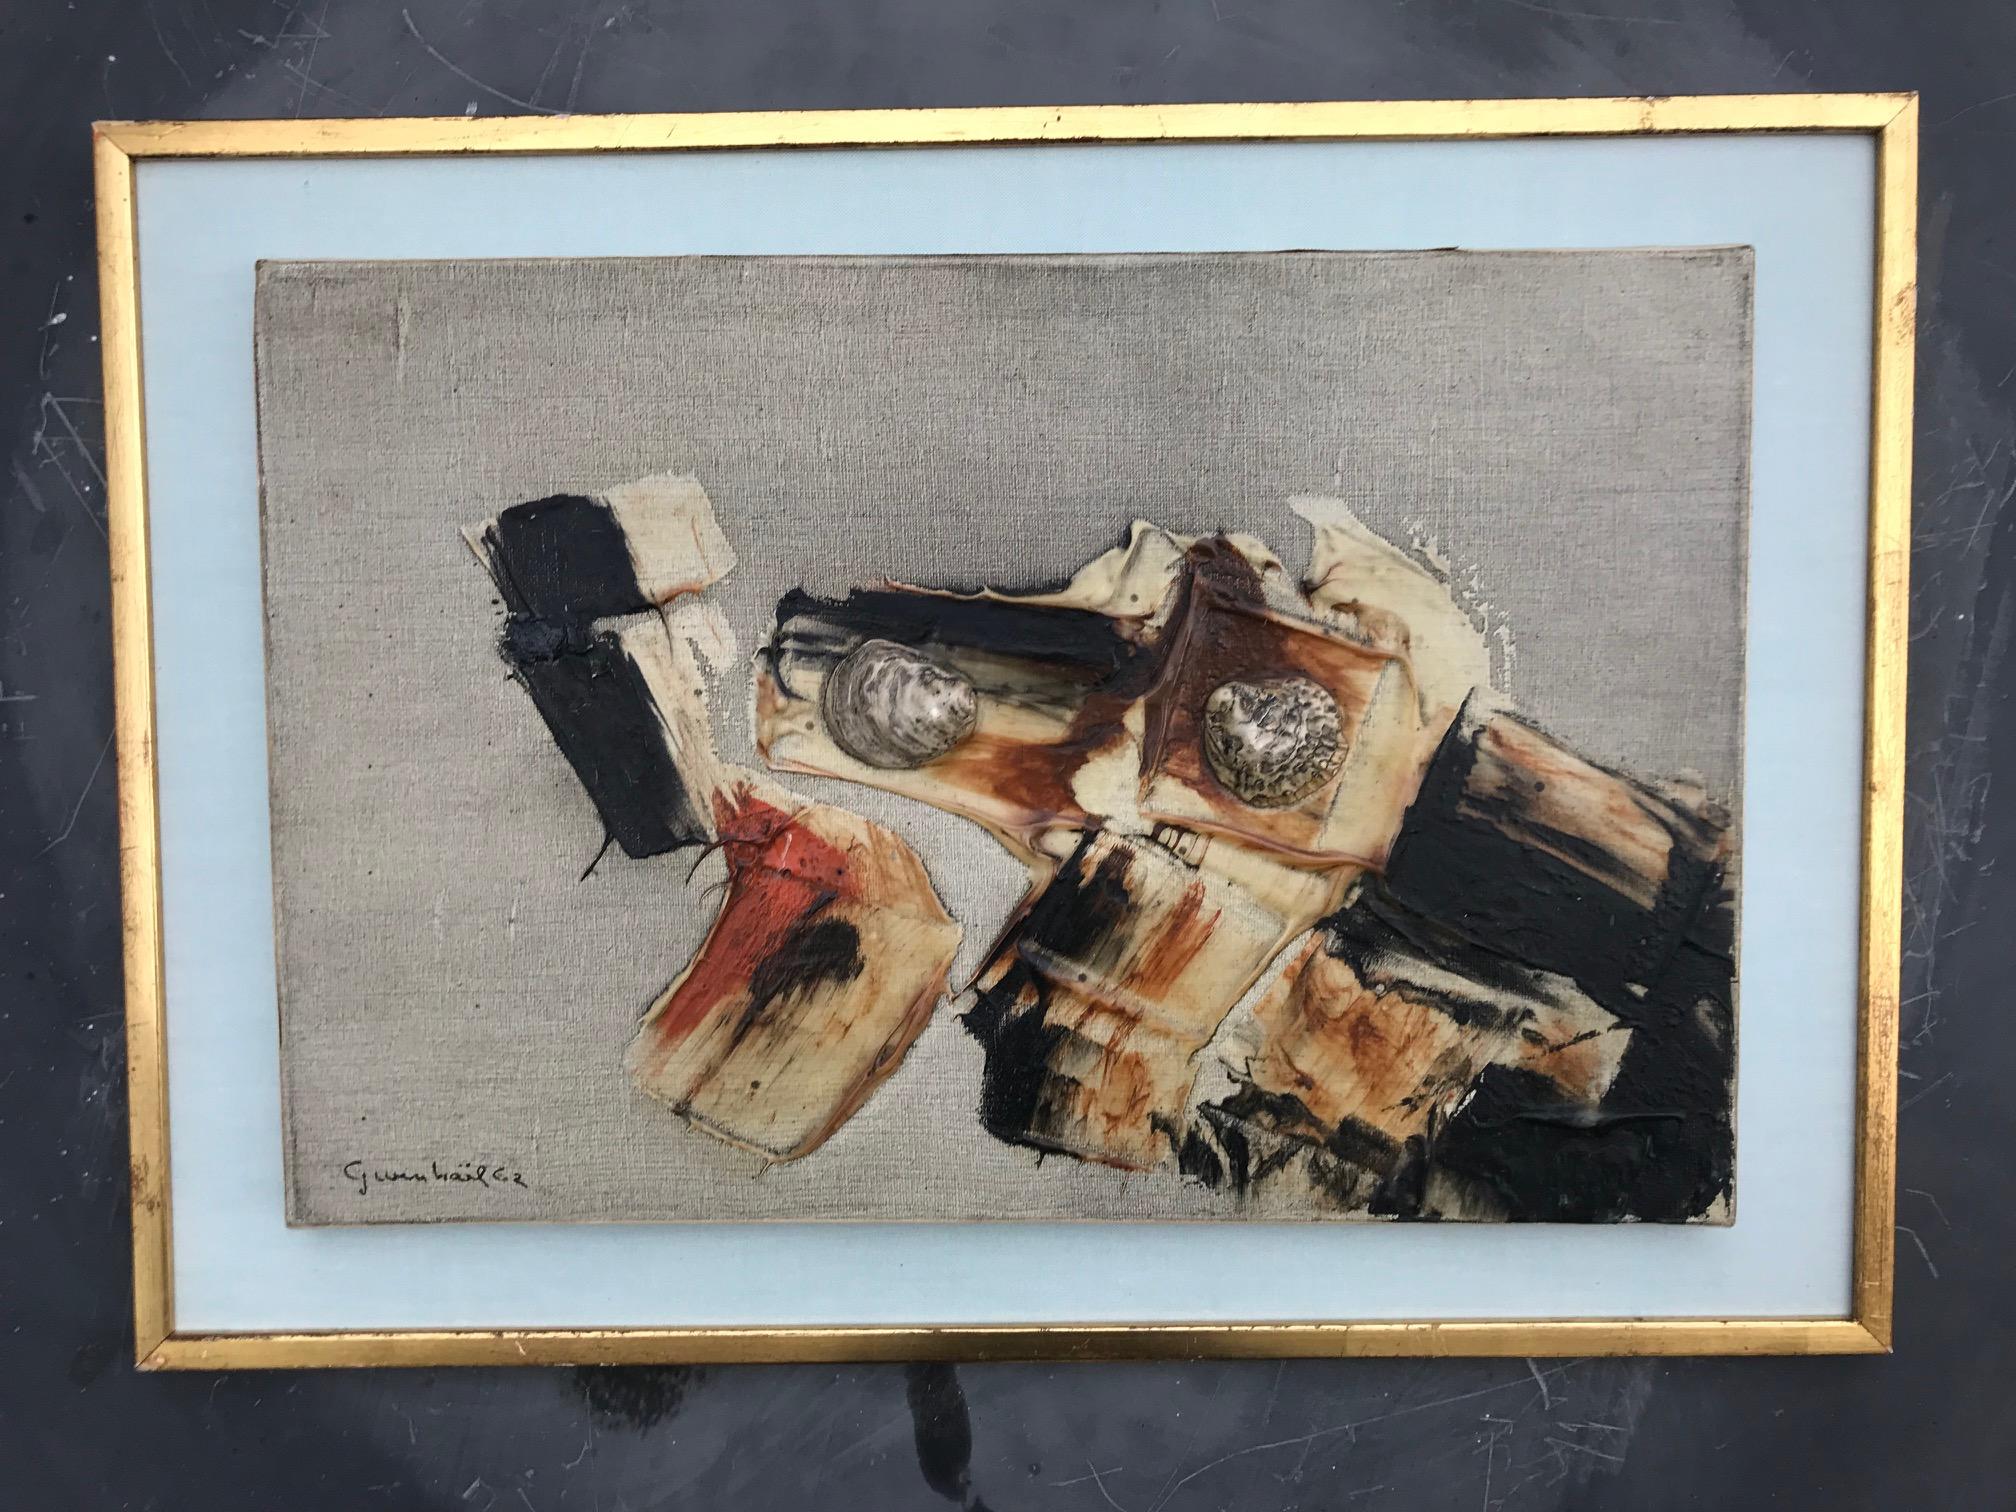 A good early example of an abstract painting, by the French 20th century artist Gwenhael Bore. Born in 1947. This painting is titled Rozana and dated 1962 on the back of the canvas. The artist has used mixed media in this specific work which gives